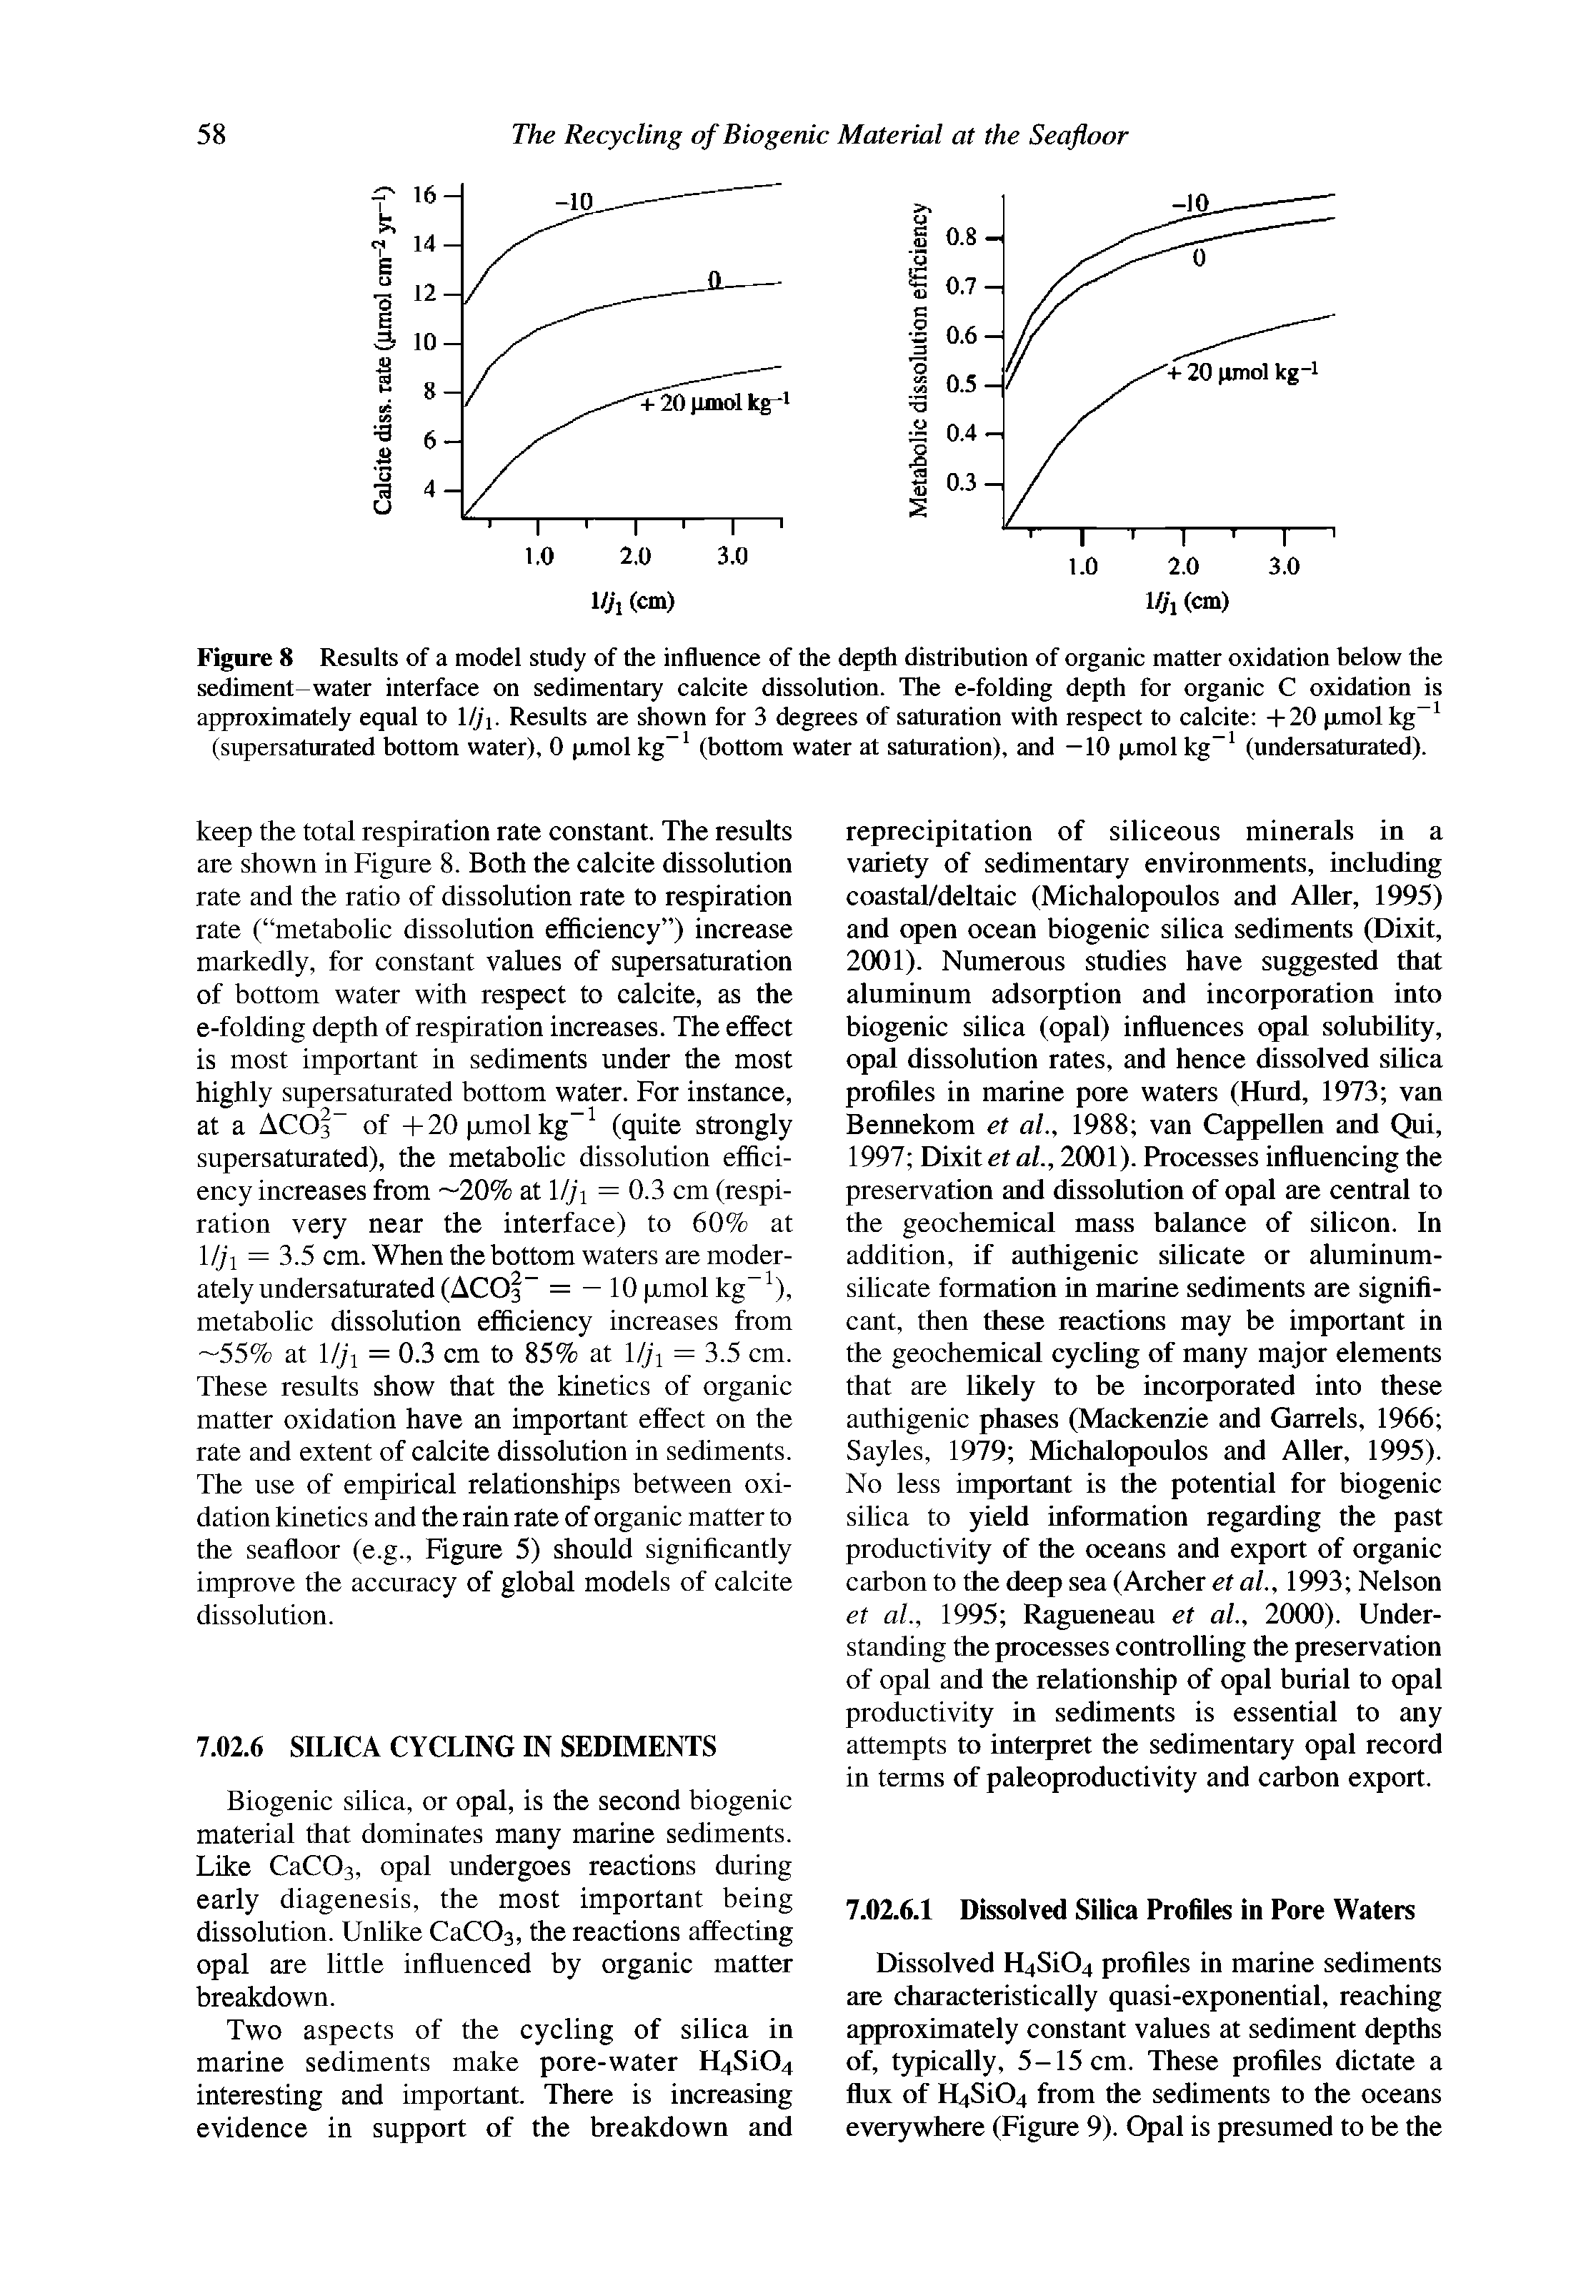 Figure 8 Results of a model study of the influence of the depth distribution of organic matter oxidation below the sediment-water interface on sedimentary calcite dissolution. The e-folding depth for organic C oxidation is approximately equal to l/ji. Results are shown for 3 degrees of saturation with respect to calcite - -20 p,molkg (supersaturated bottom water), 0 p,mol kg (bottom water at saturation), and —10 p,mol kg (undersaturated).